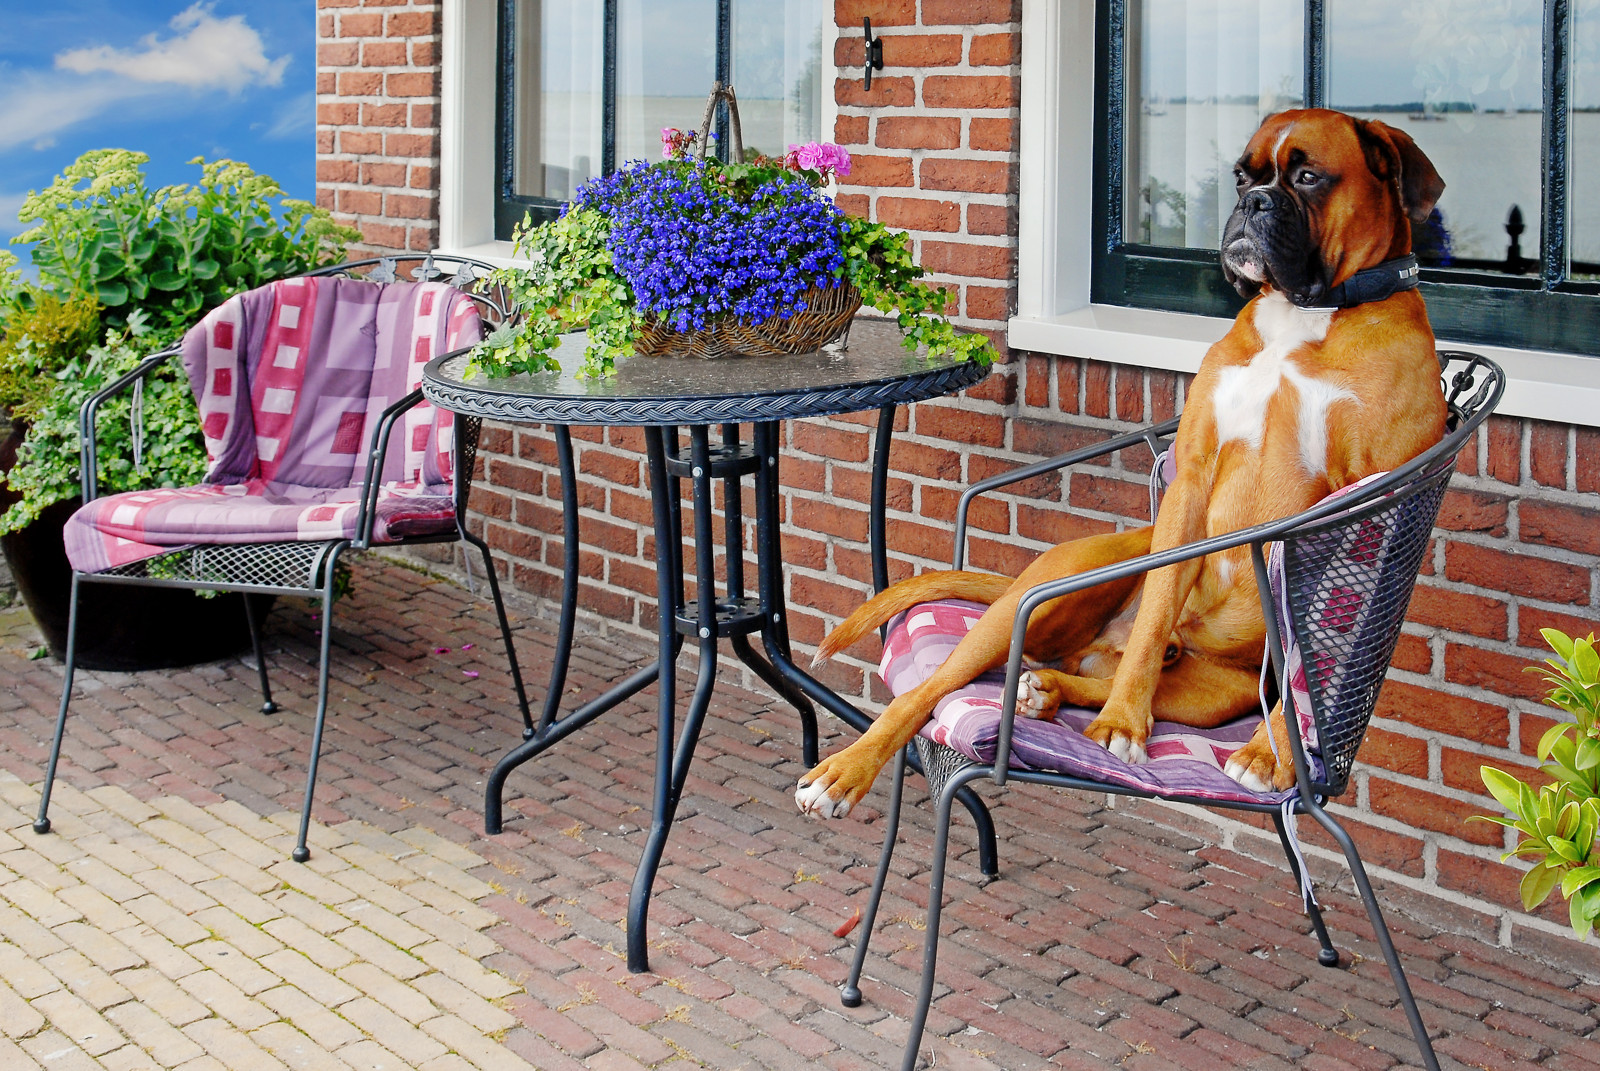 Dog sitting in chair on patio